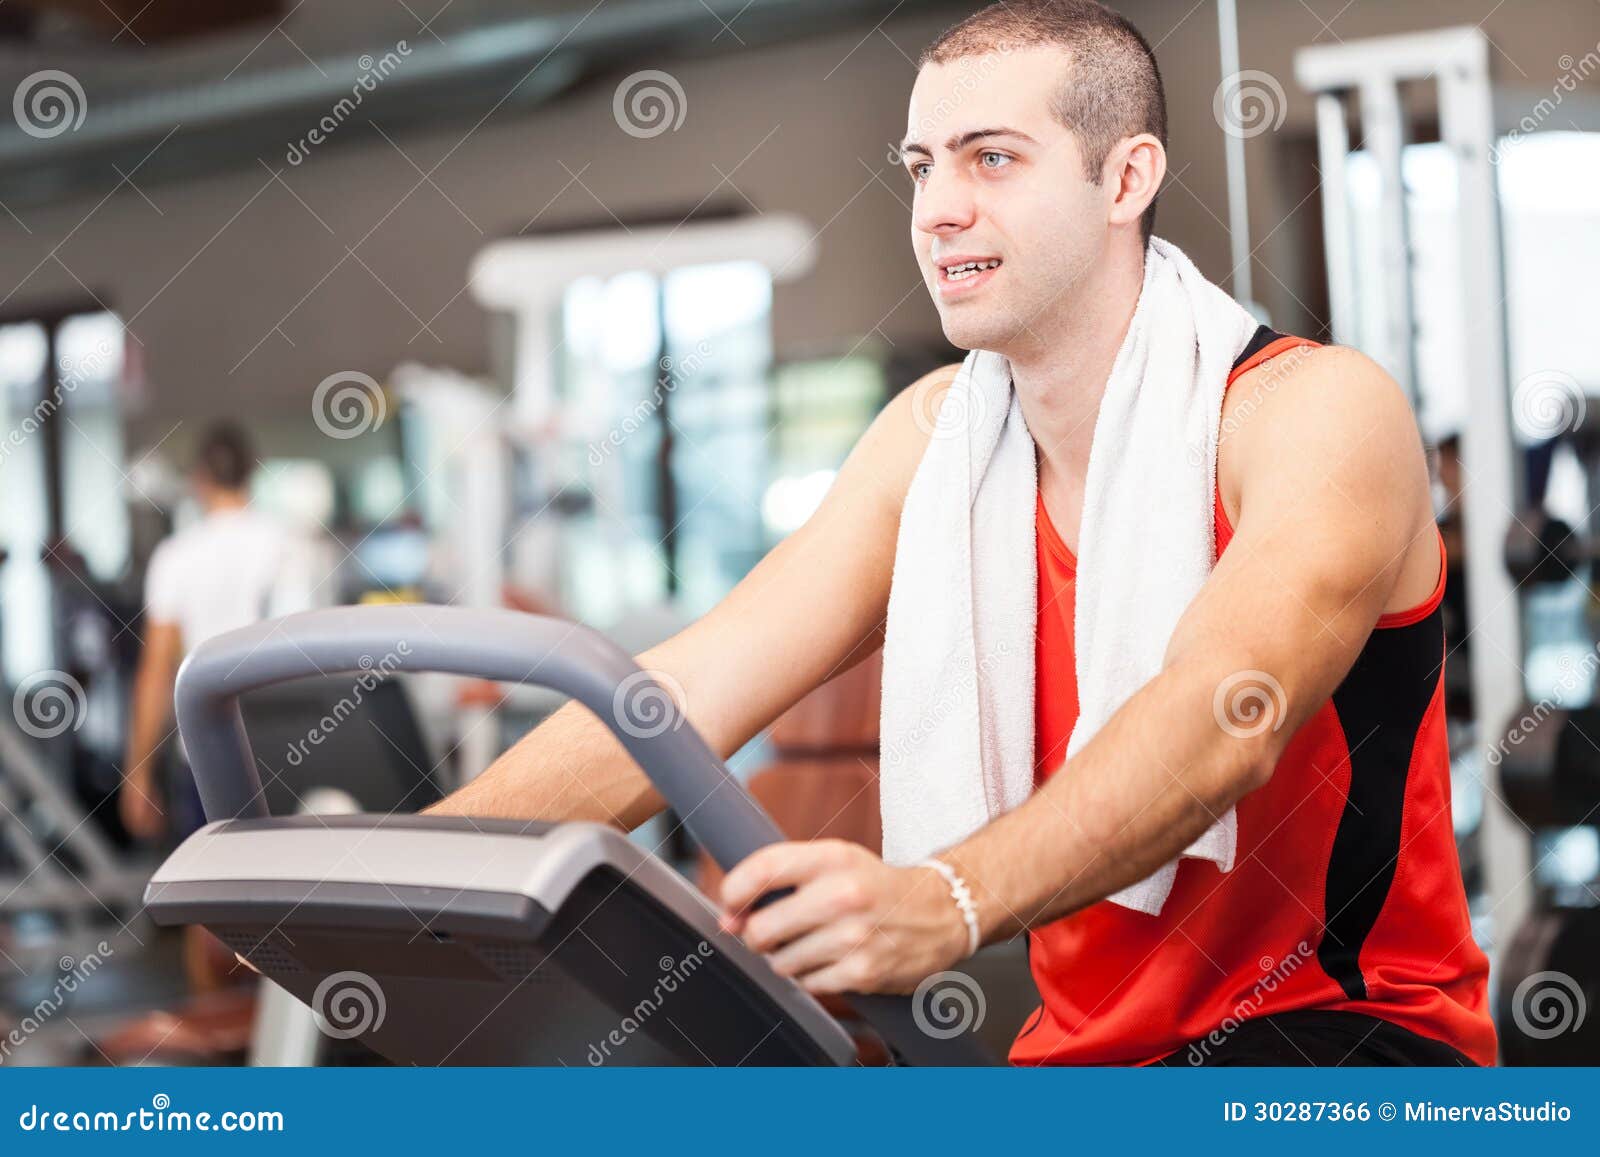 Man Training in a Fitness Club Stock Photo - Image of athlete, hall